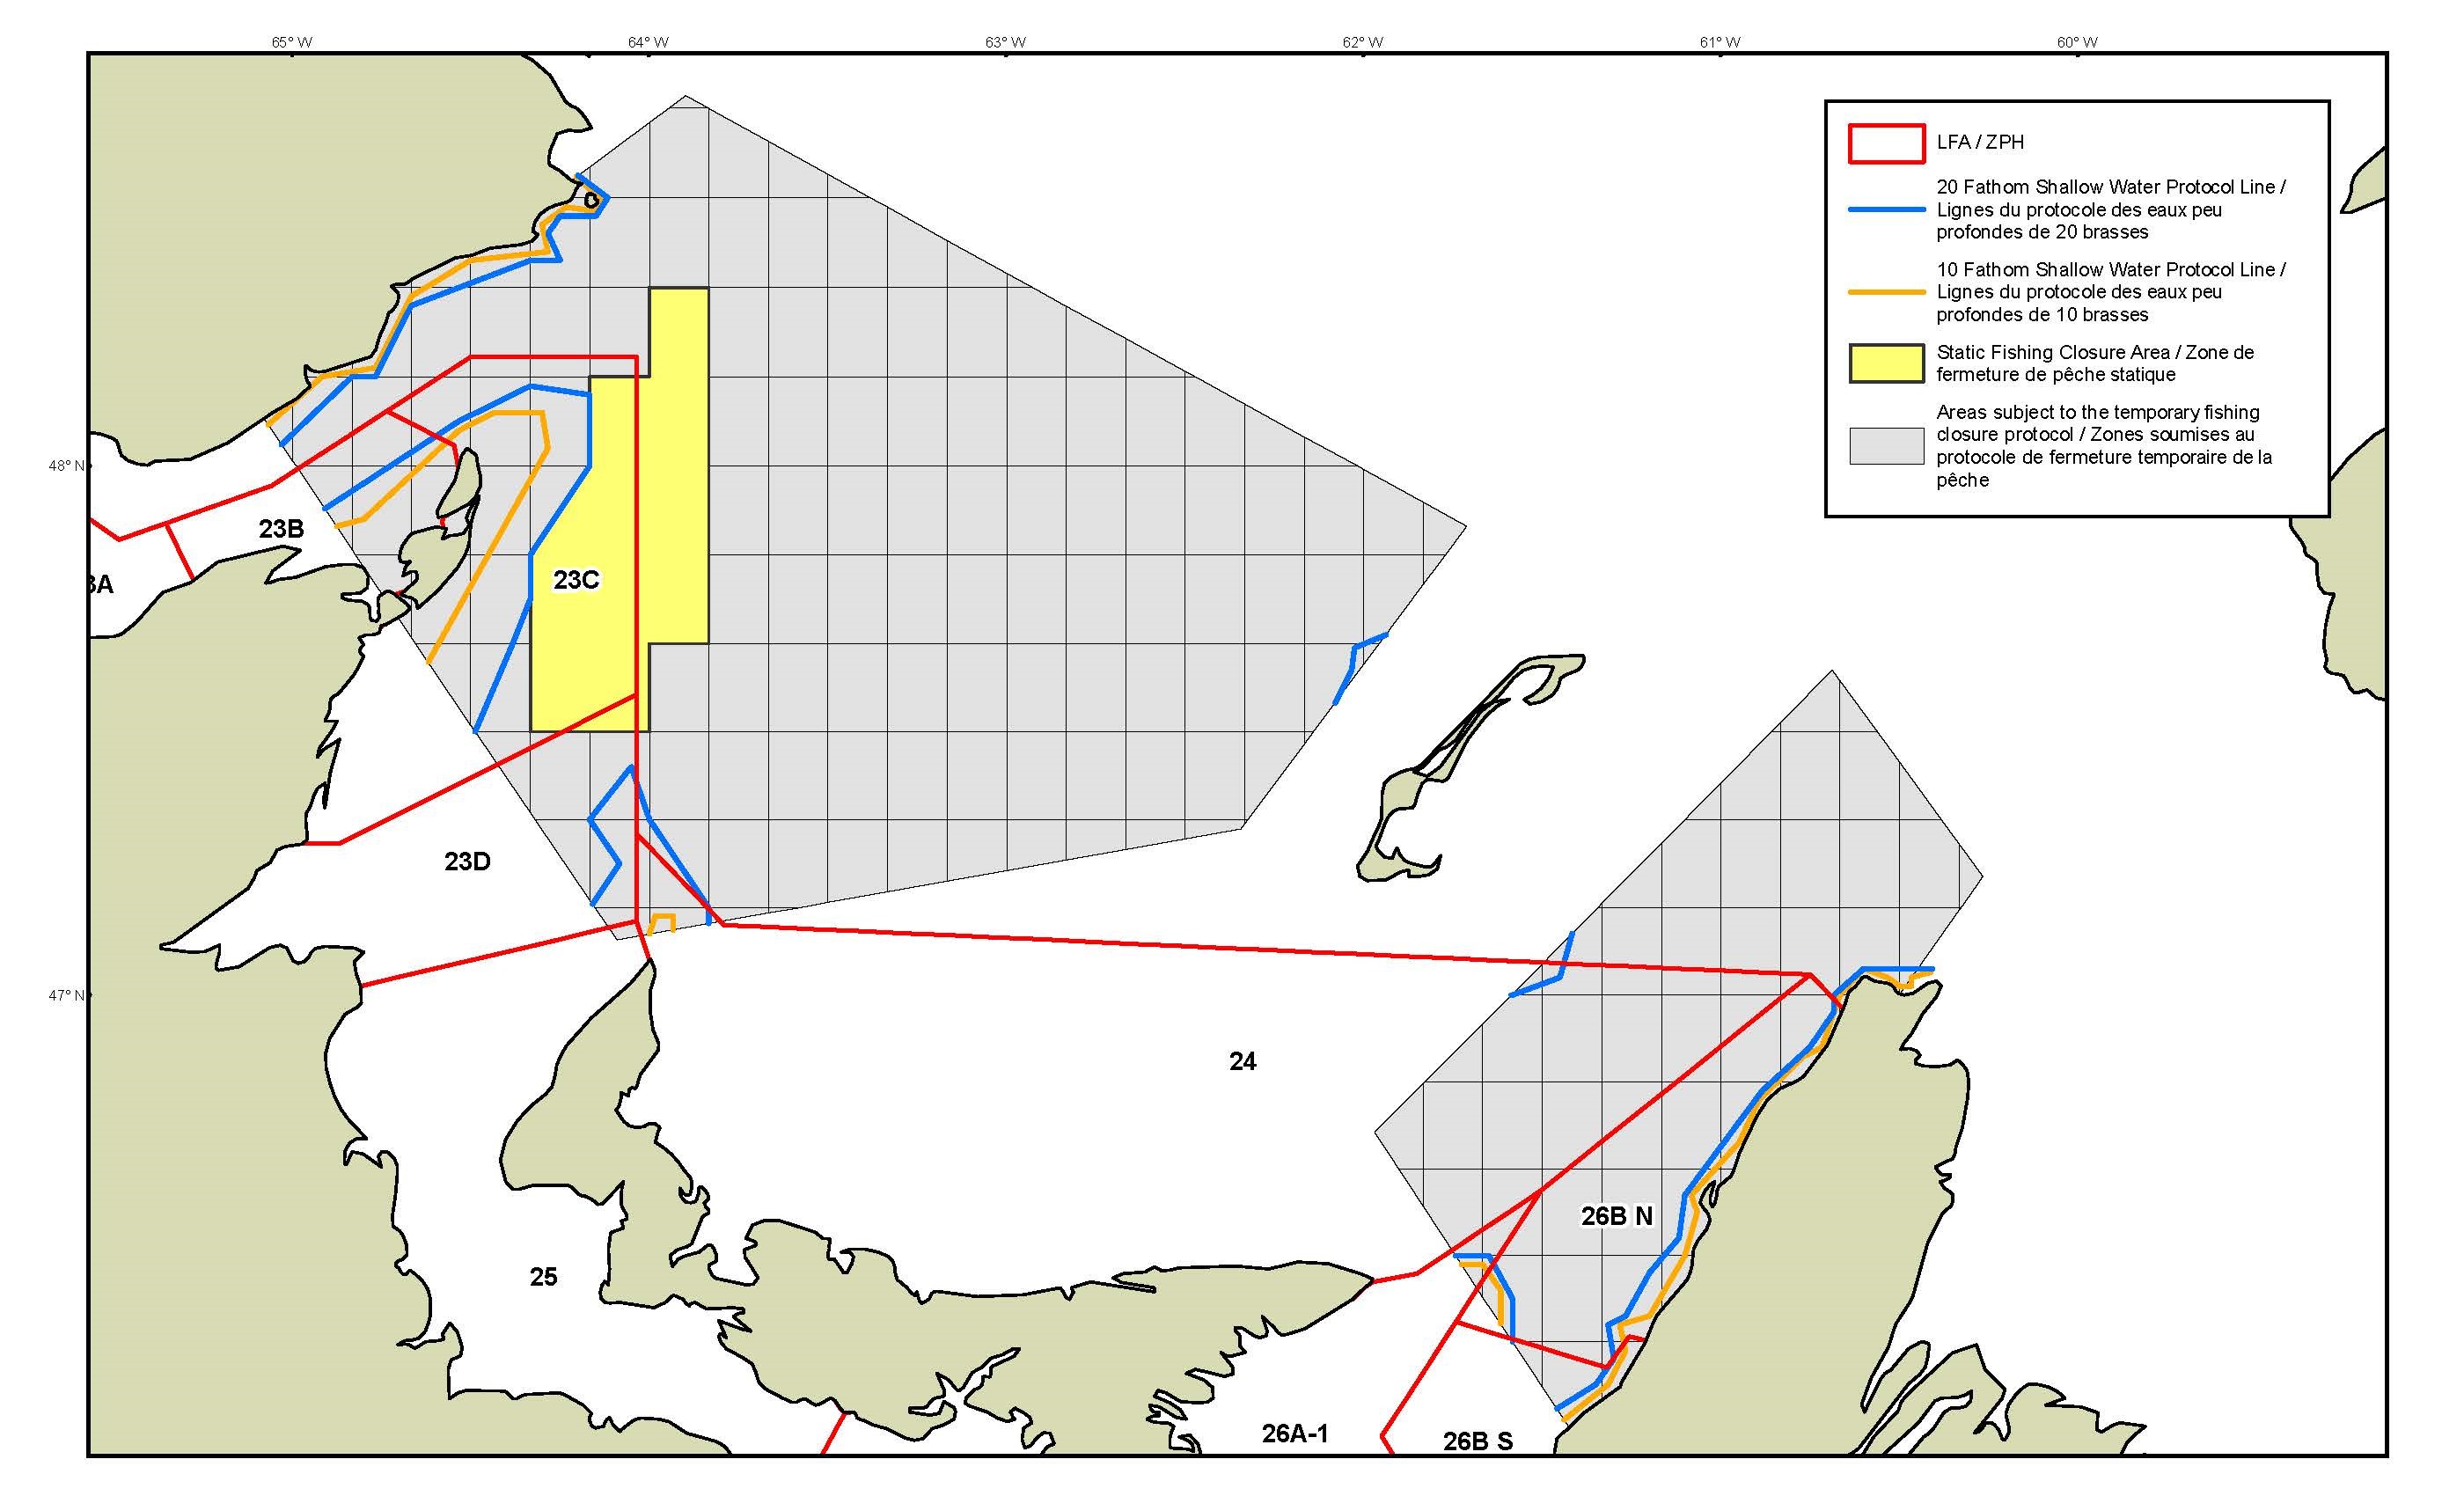 Map illustrating the Lobster Fishing Areas, static fishing closure area (static zone), and the dynamic management areas subject to temporary closures (dynamic zone)